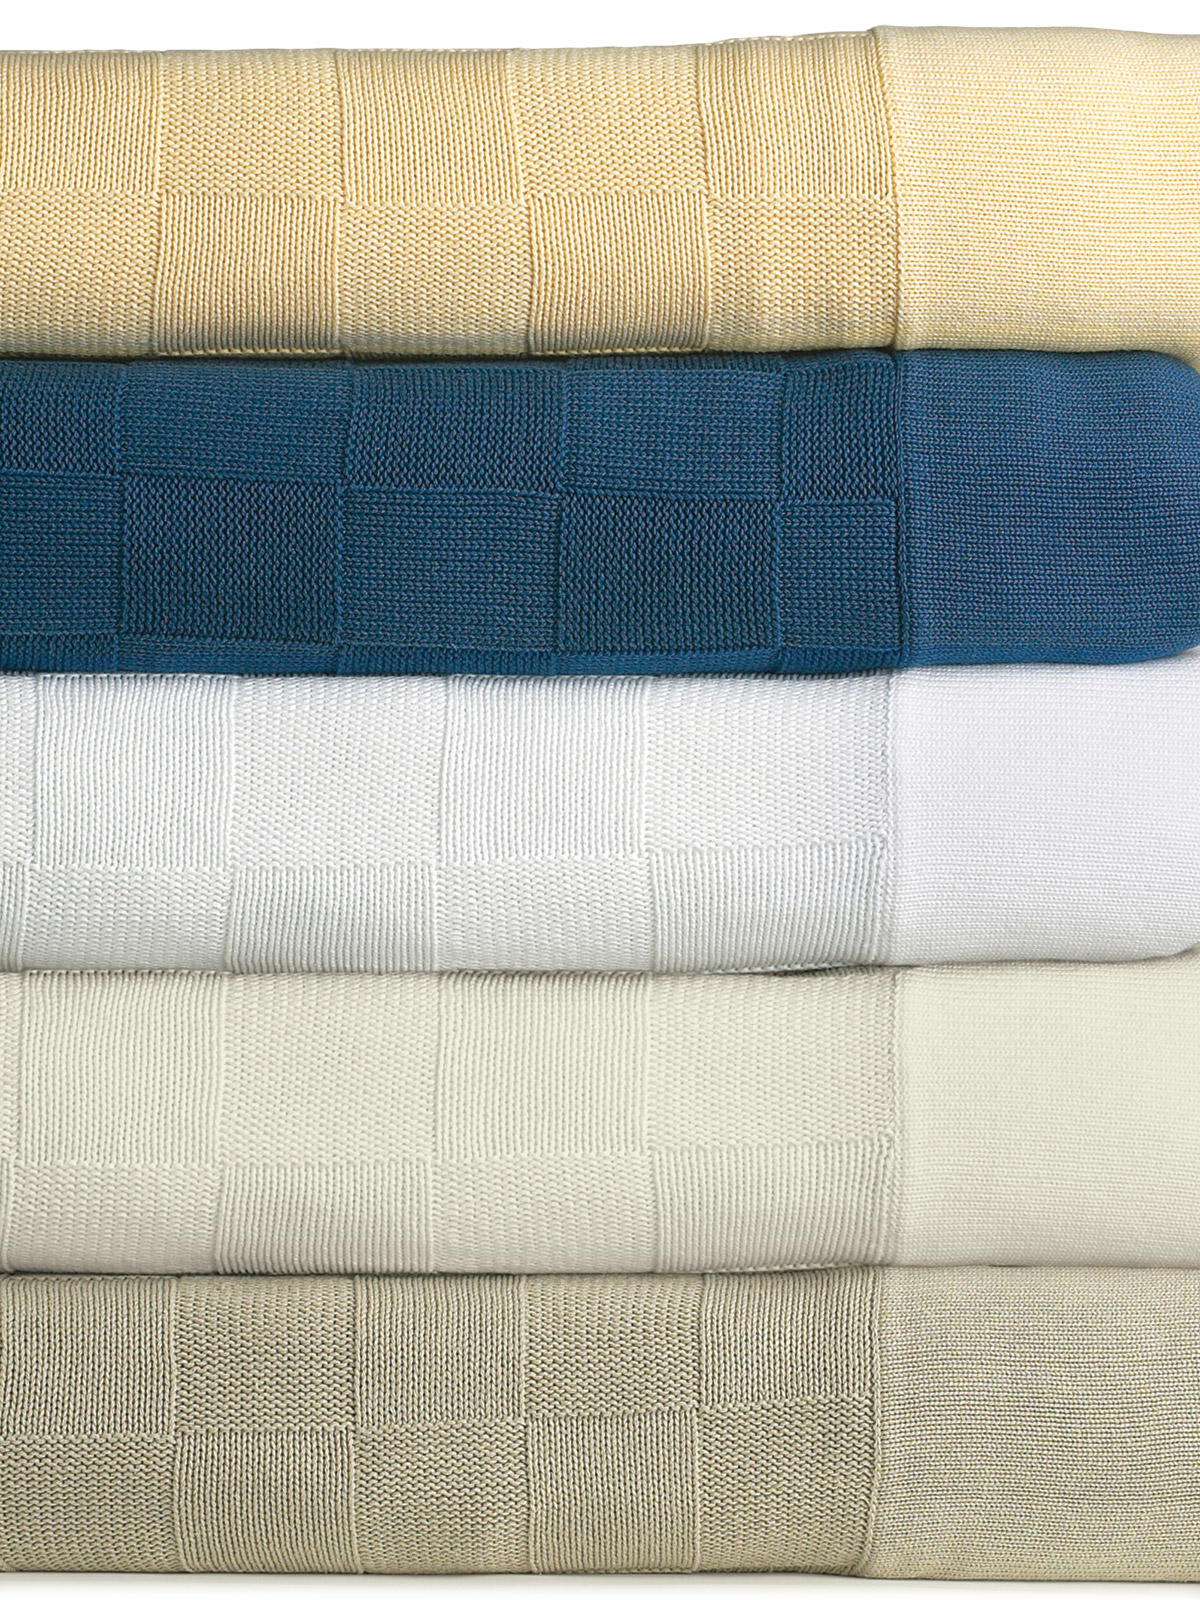 image of Canasta Cotton Blankets